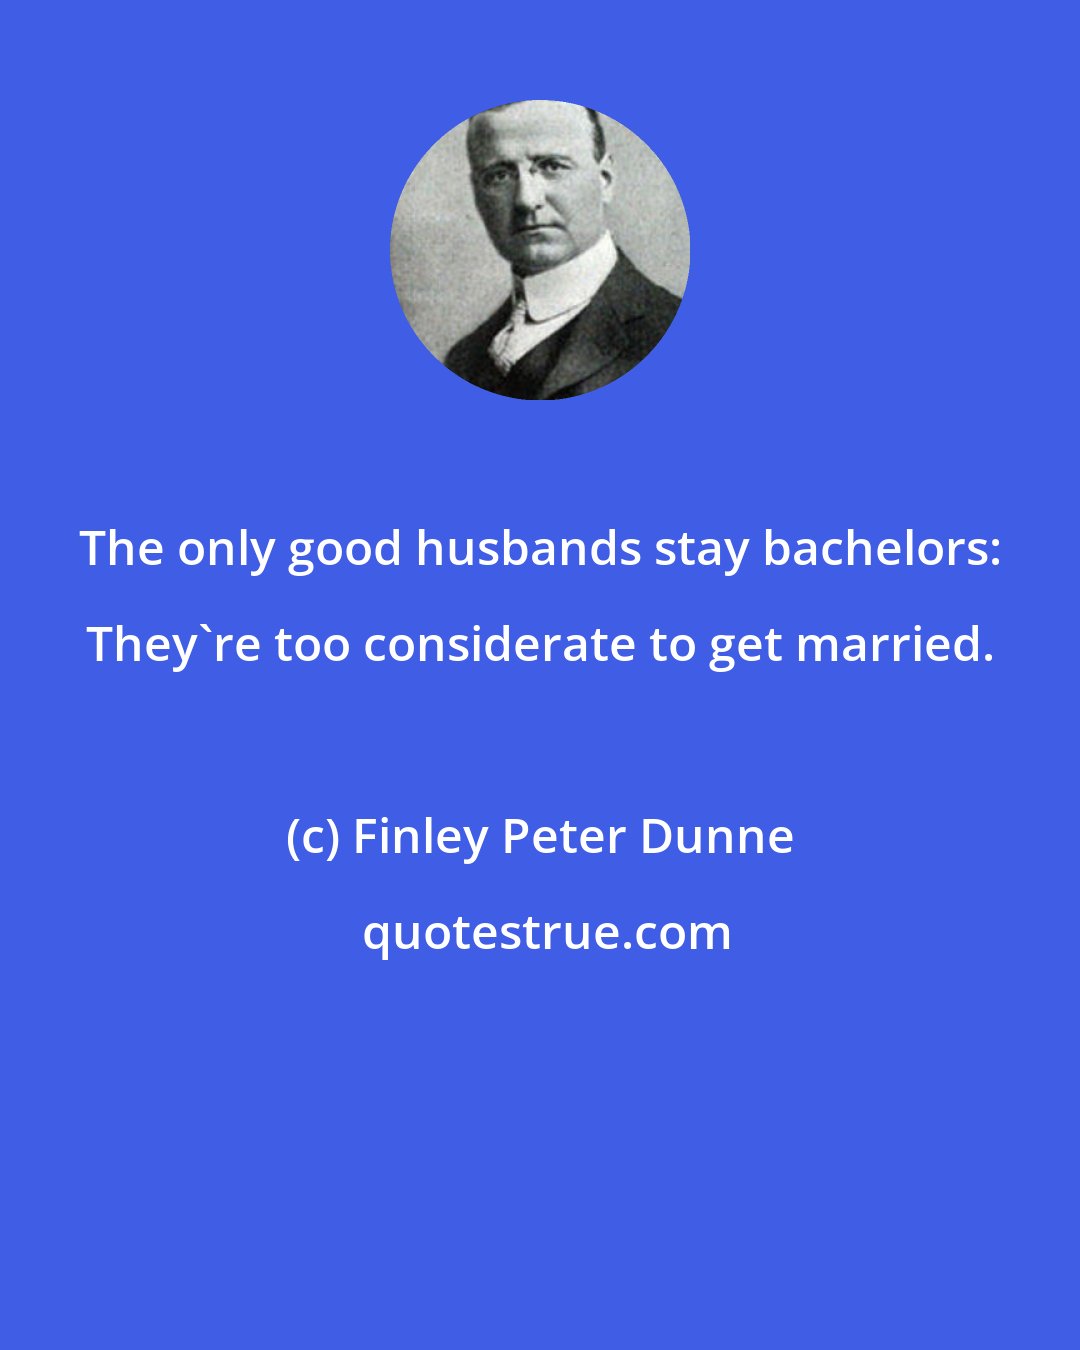 Finley Peter Dunne: The only good husbands stay bachelors: They're too considerate to get married.